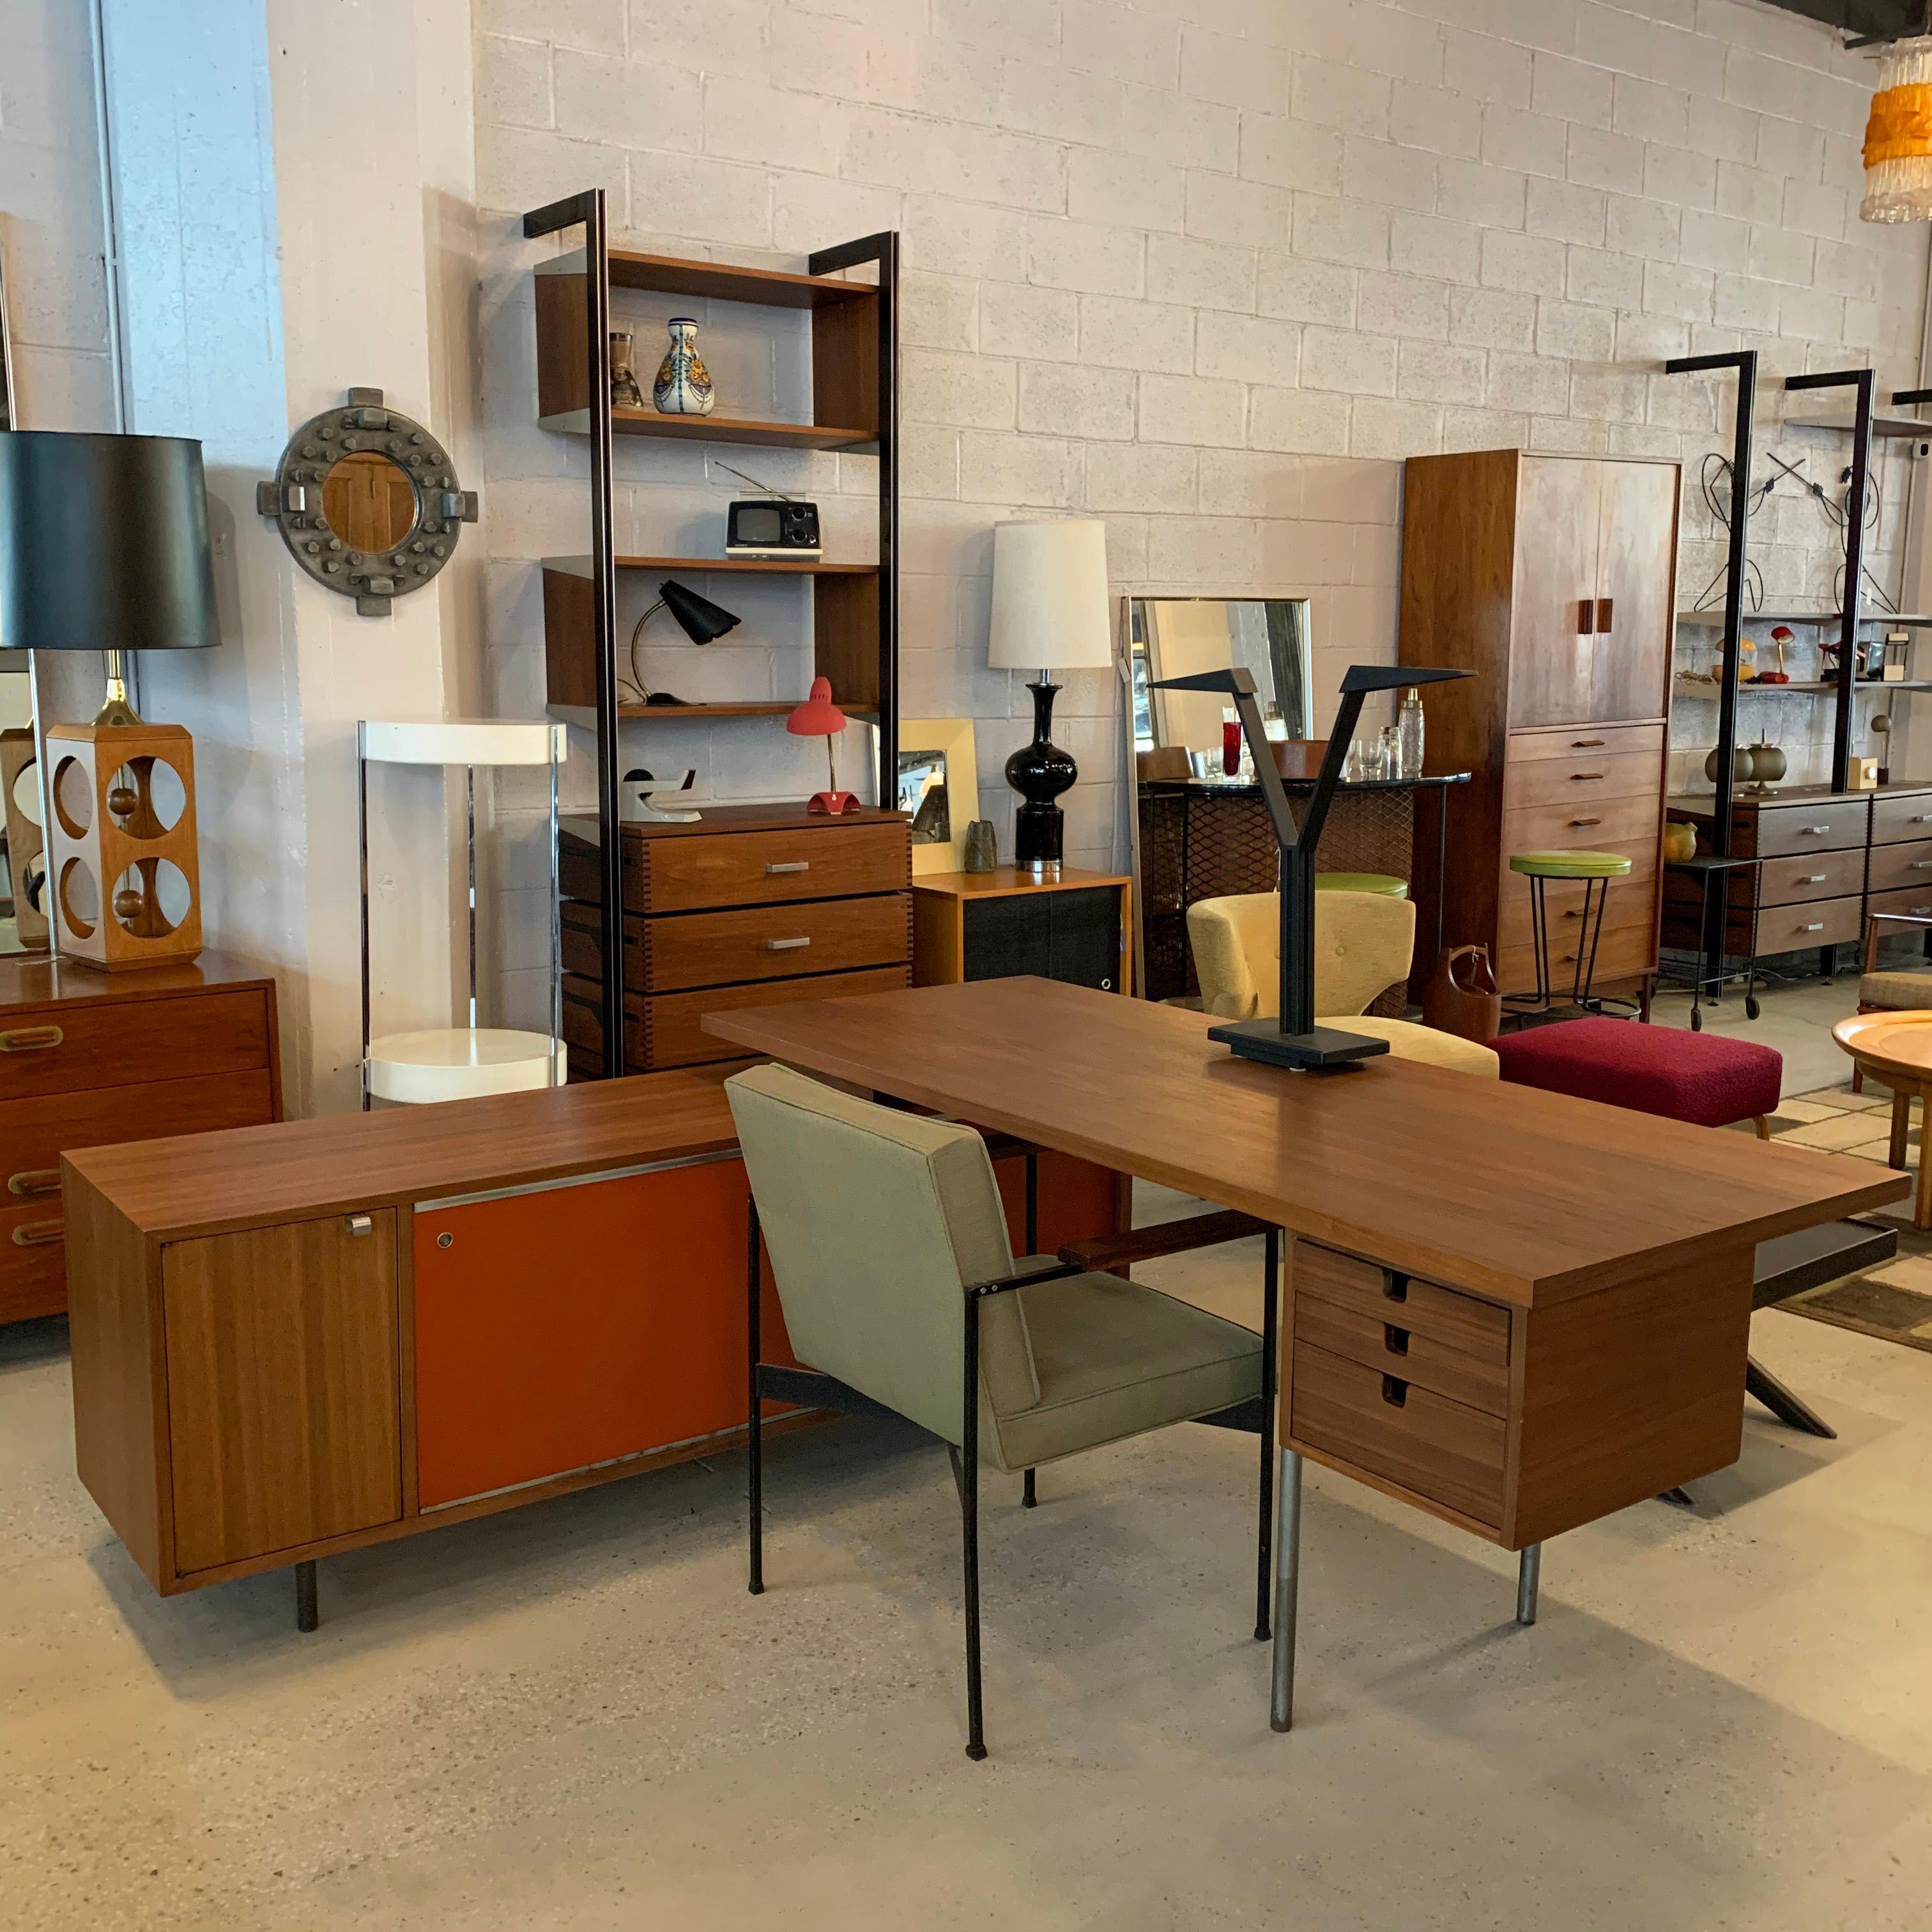 Mid-Century Modern, executive desk with credenza return by George Nelson for Herman Miller features a walnut desk with steel H legs that measures 72 x 30 x 29.5, with attached walnut office credenza with lacquered masonite sliding doors that